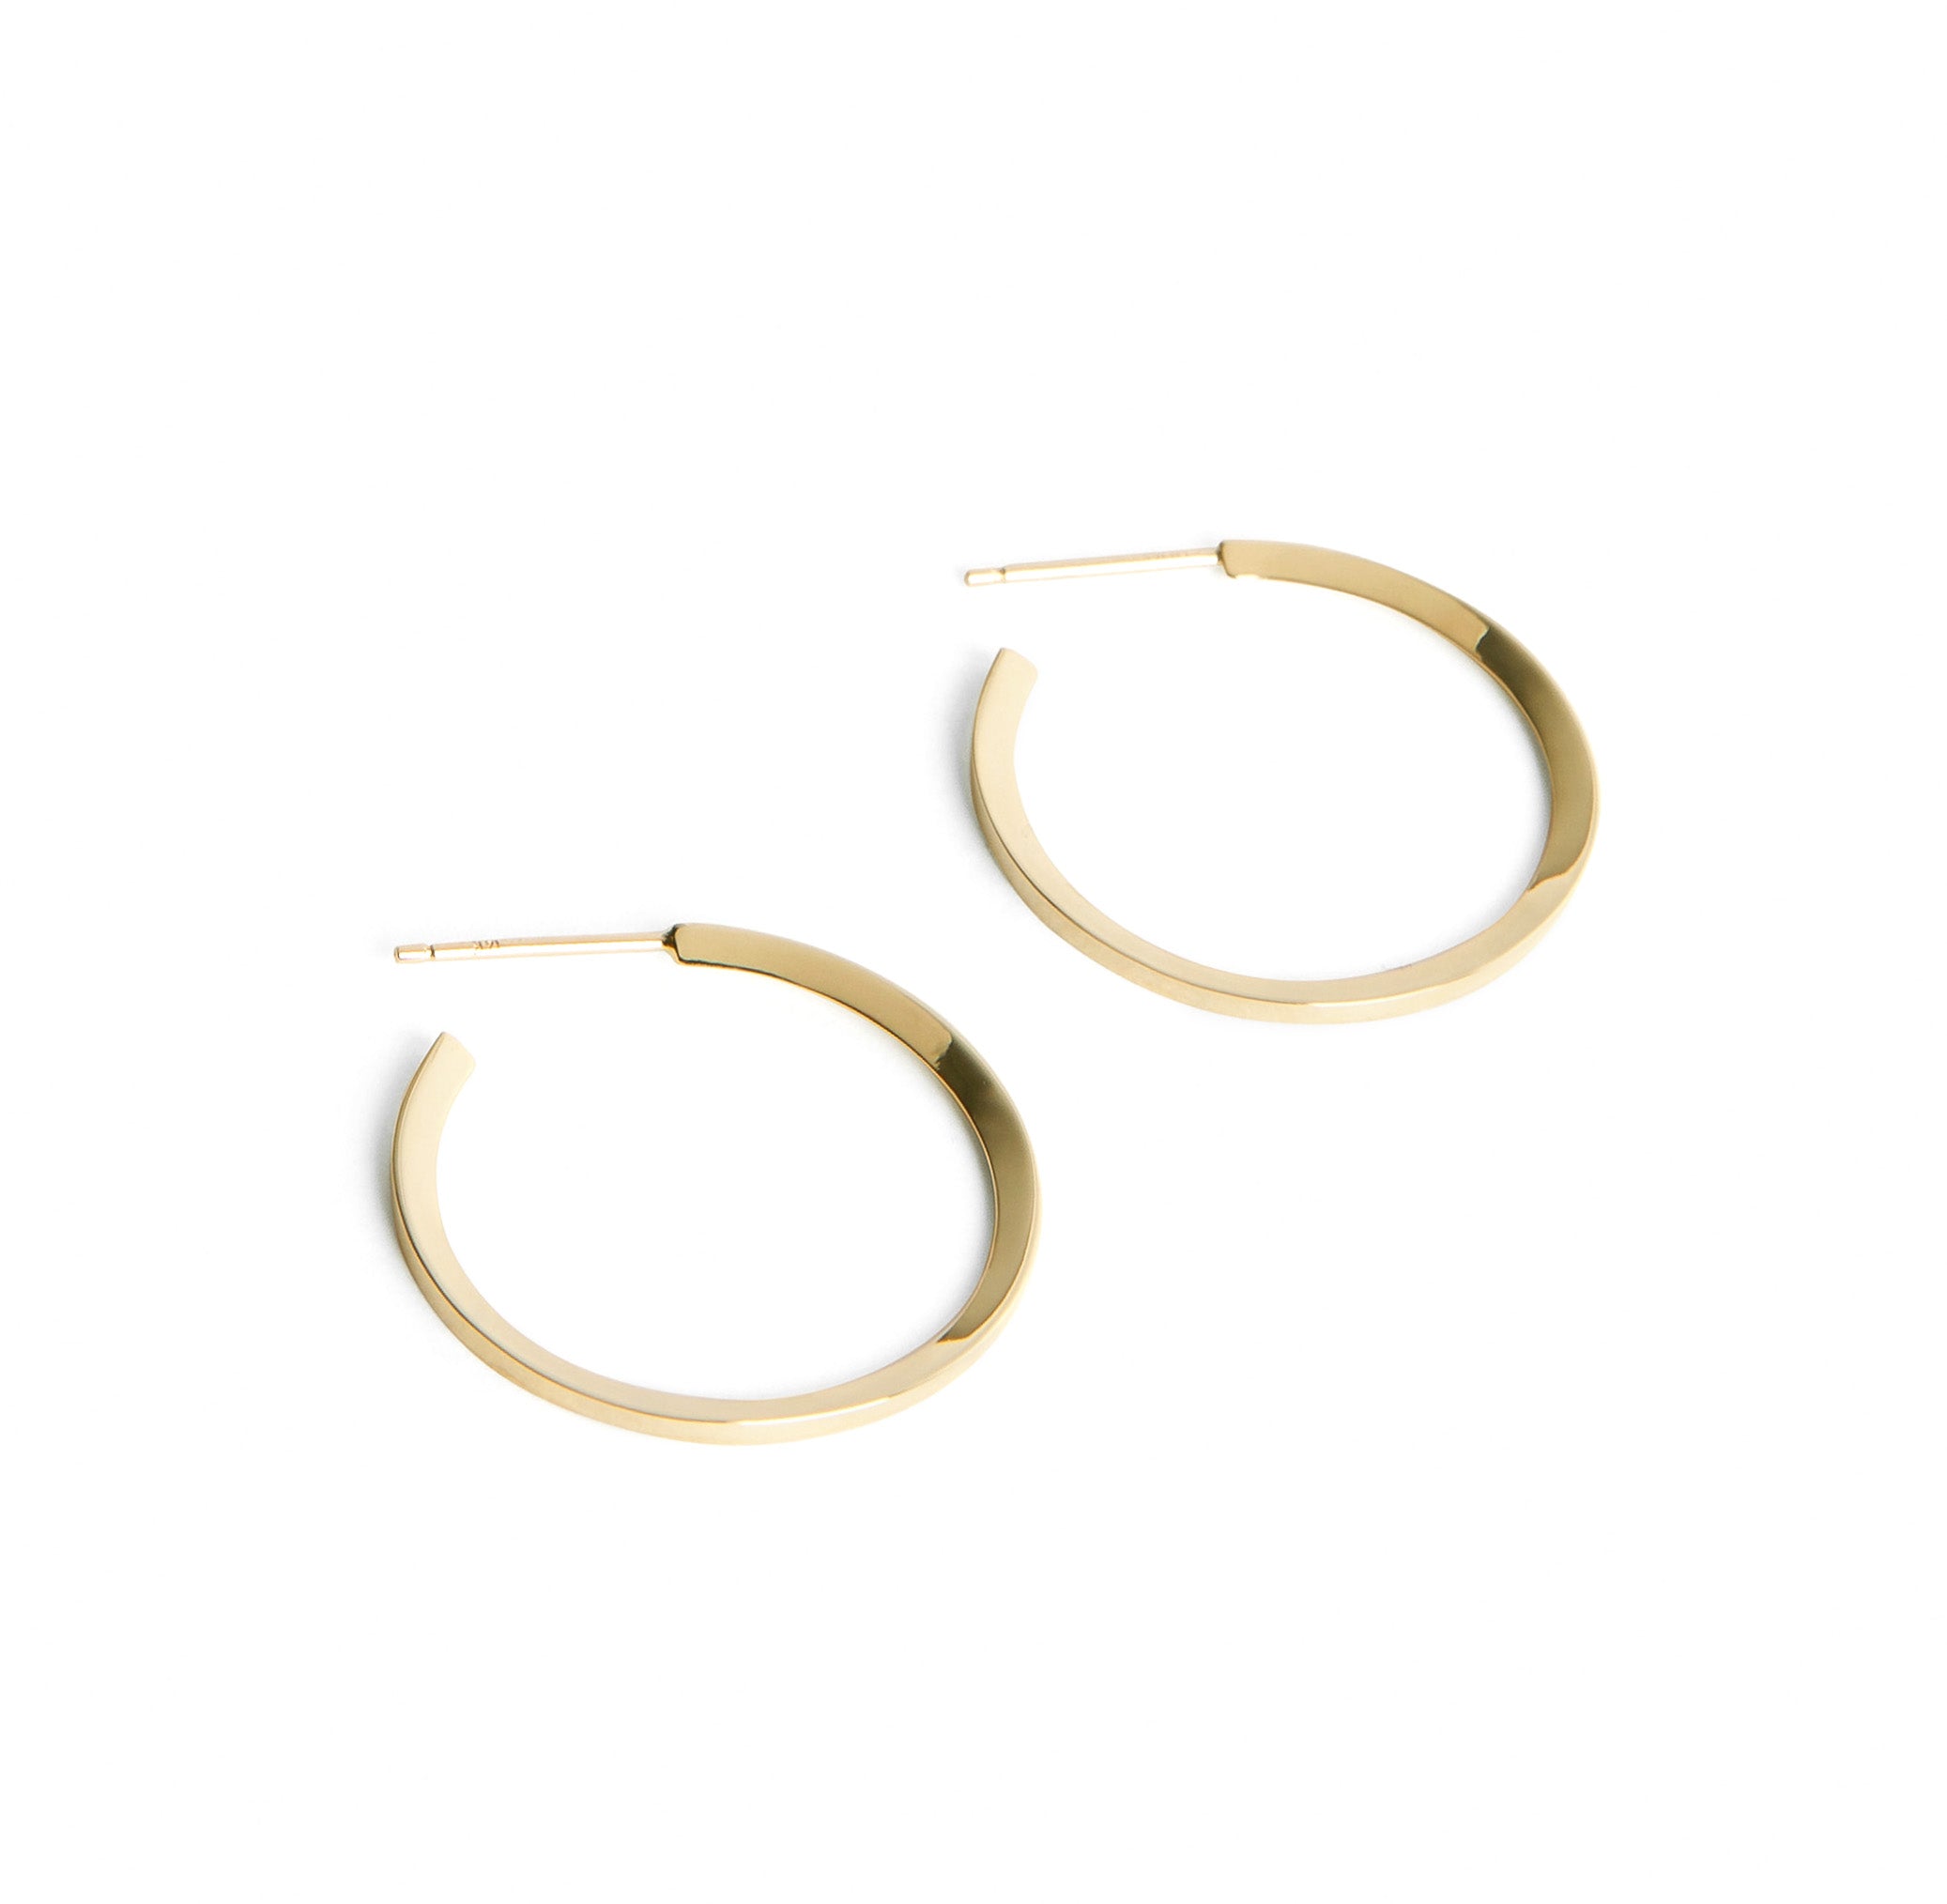 Large Kai Handmade Hoops in Sterling Silver By SHW Fine Jewelry New York City